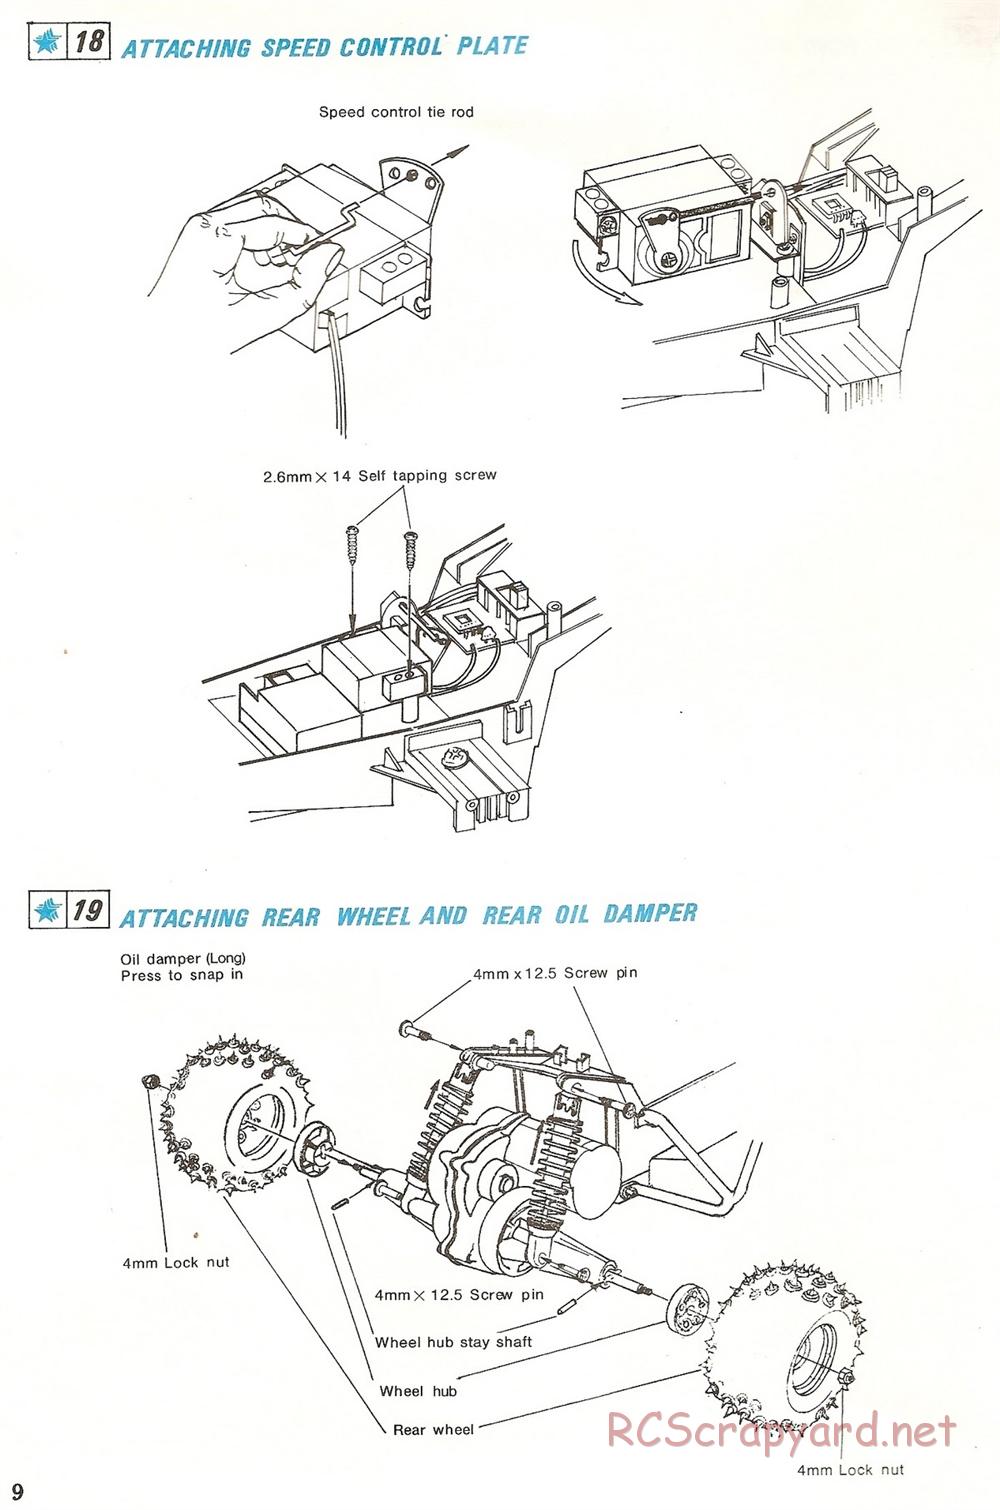 Traxxas - The Cat (1987) - Manual - Page 10